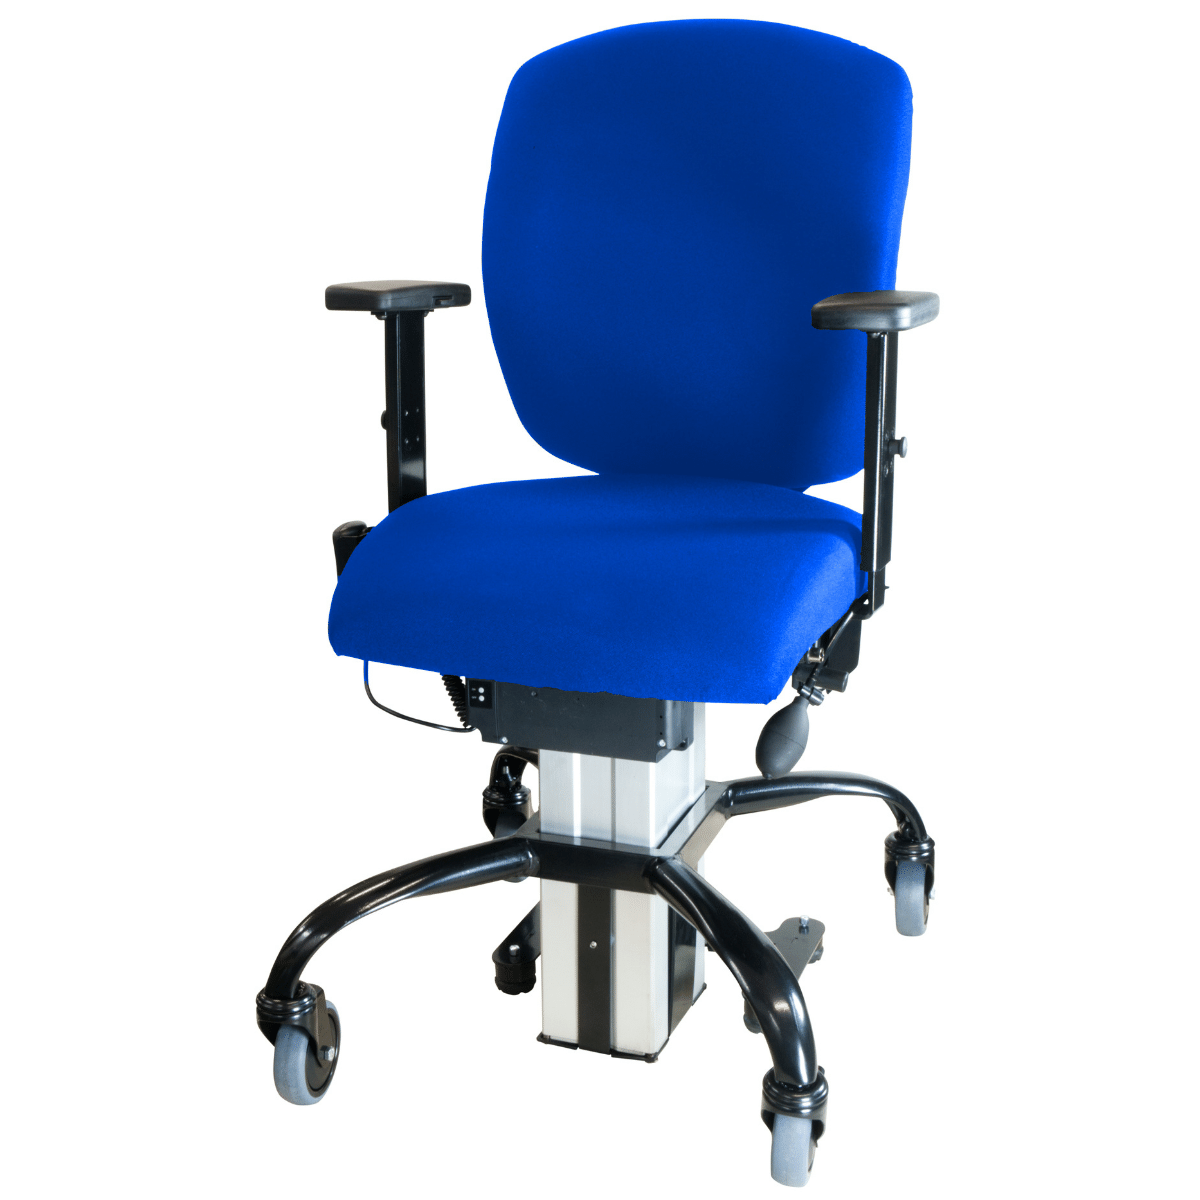 eLiftRotate Powered Lift Office Chair